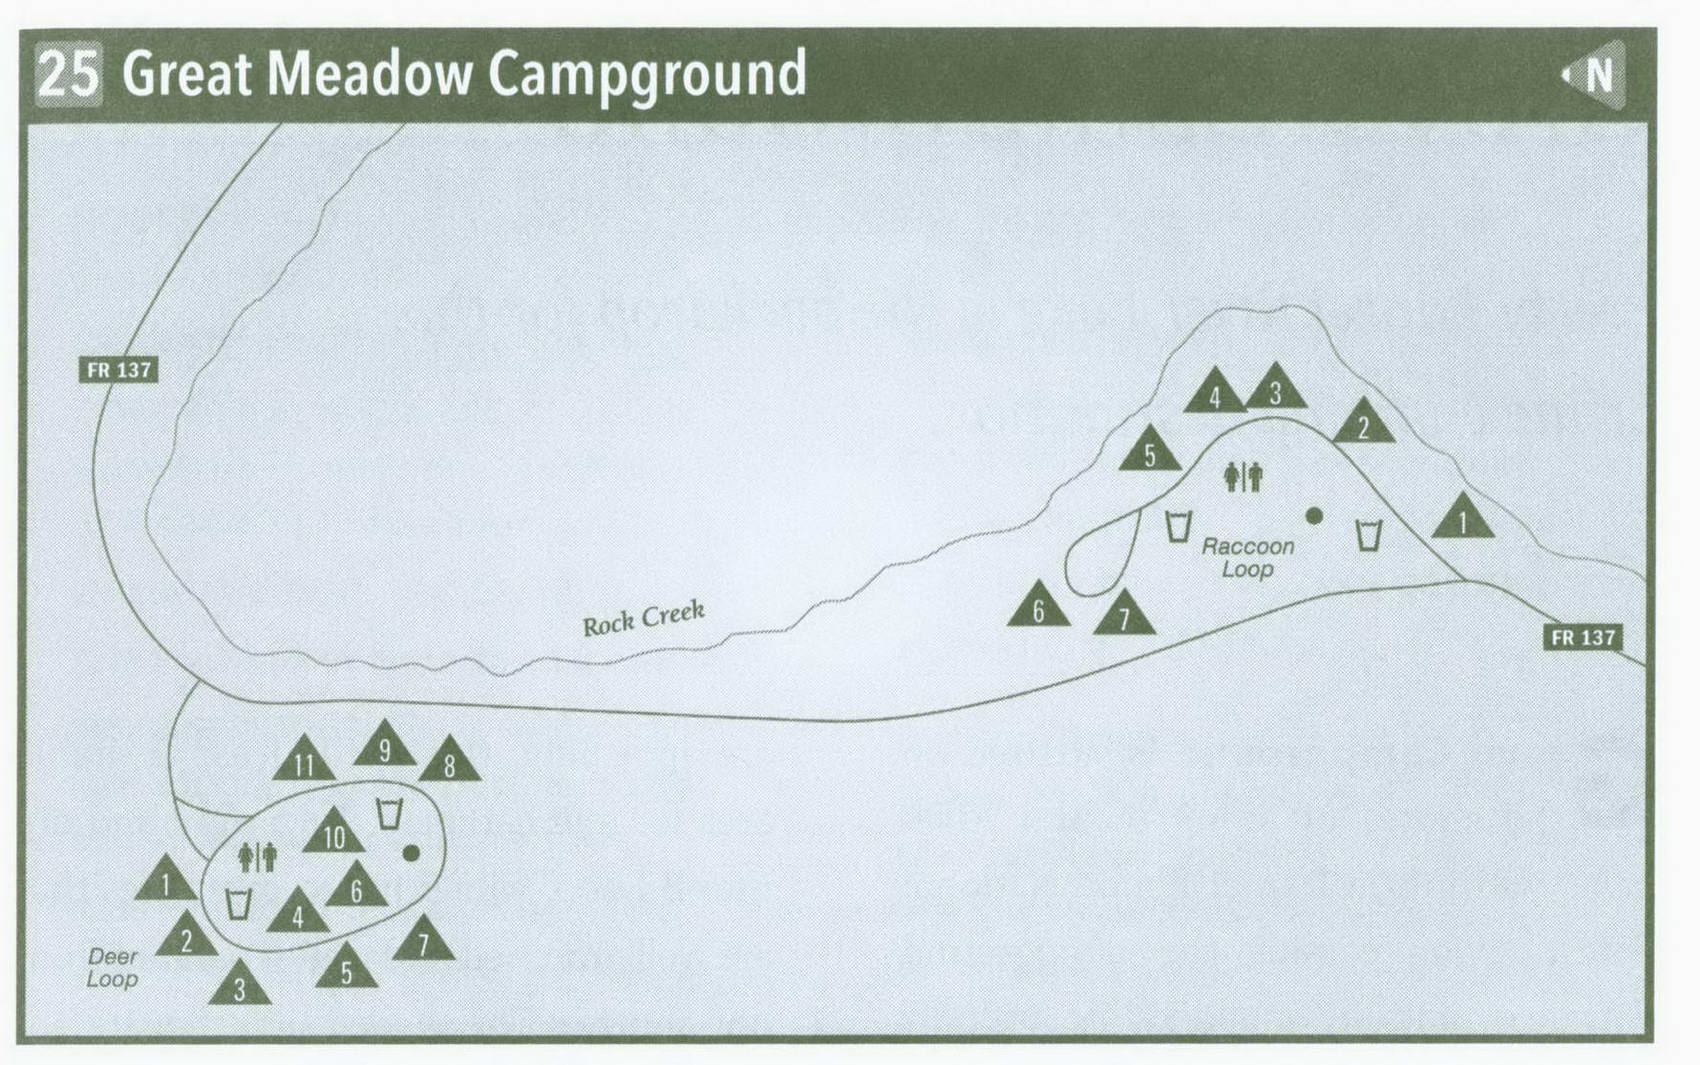 Great Meadow Campground